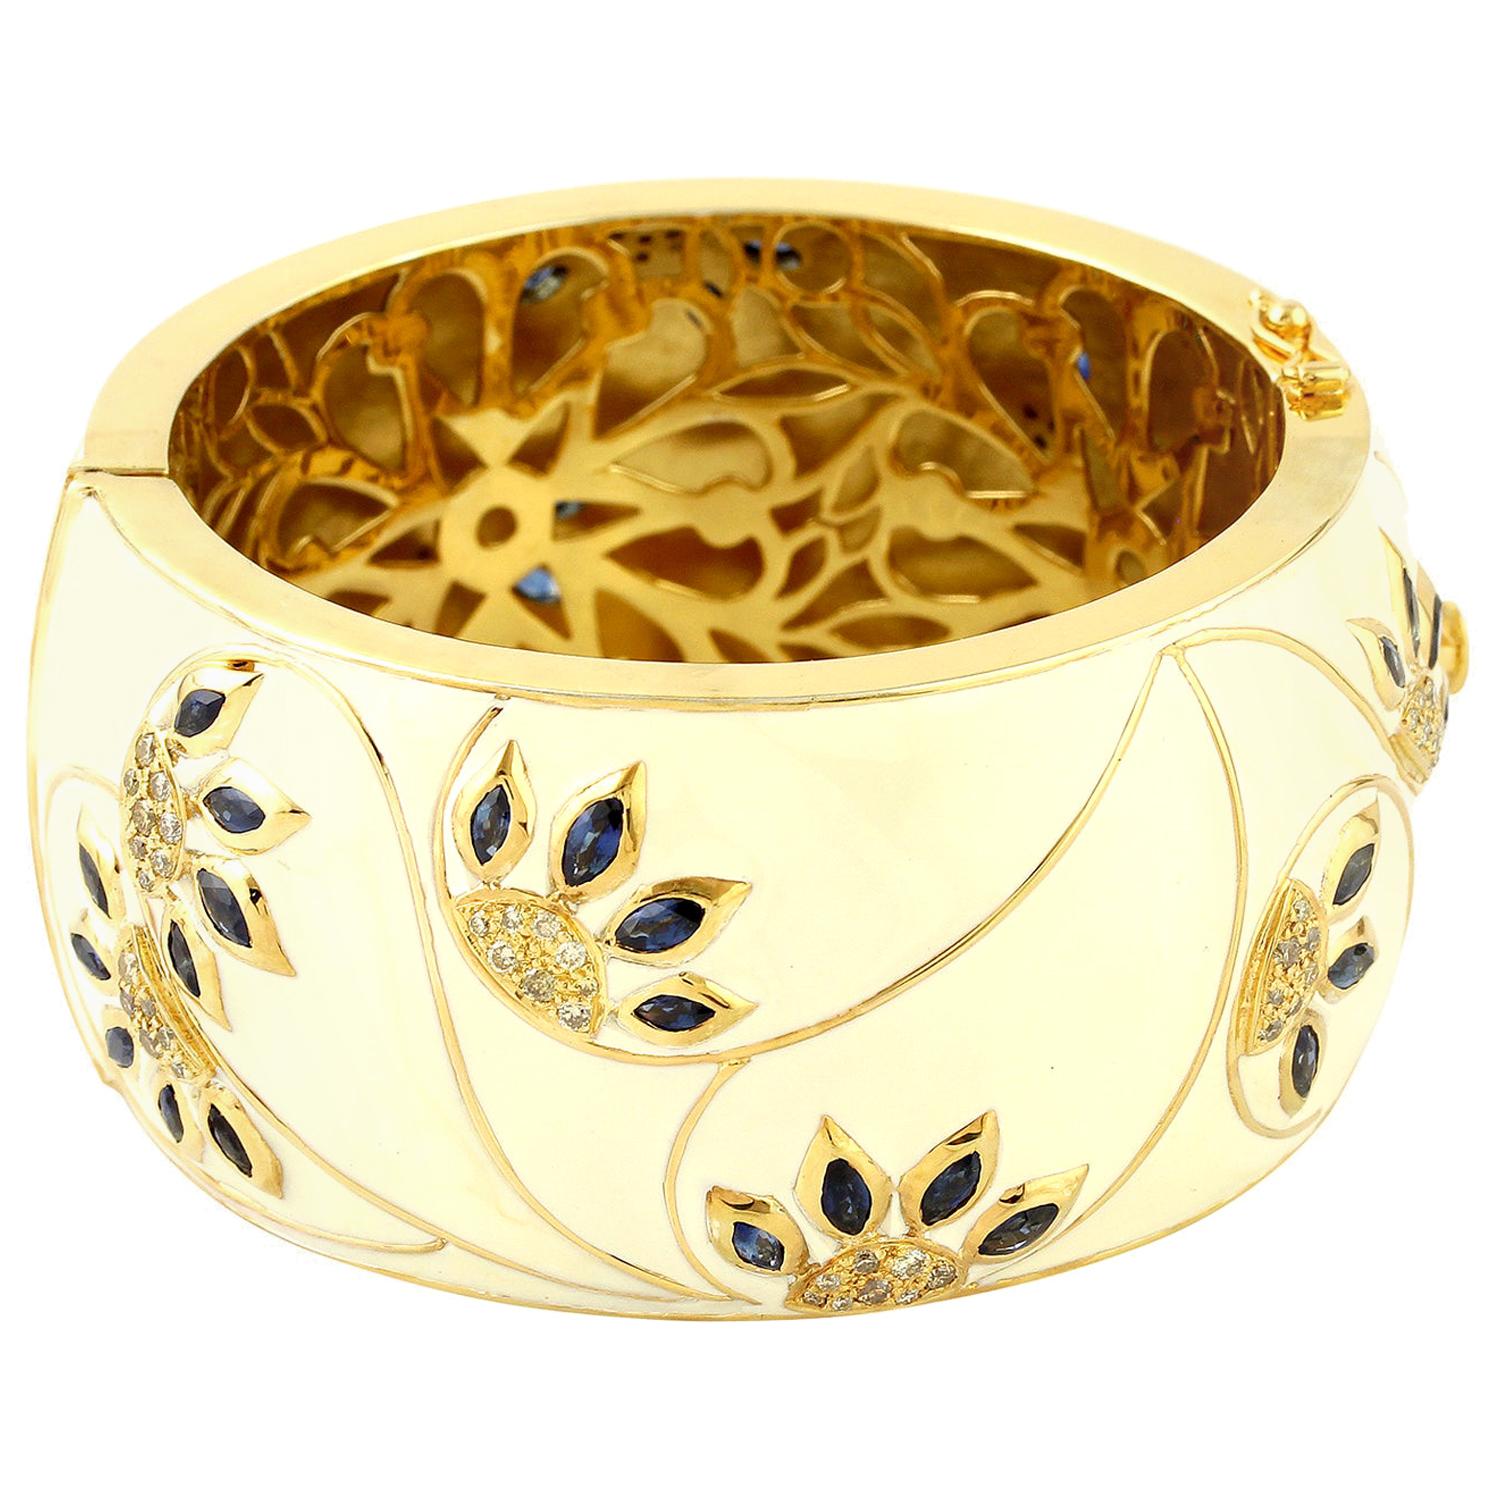 Cream Enamel Cuff with Diamonds and Sapphire in 18 Karat Gold and Silver